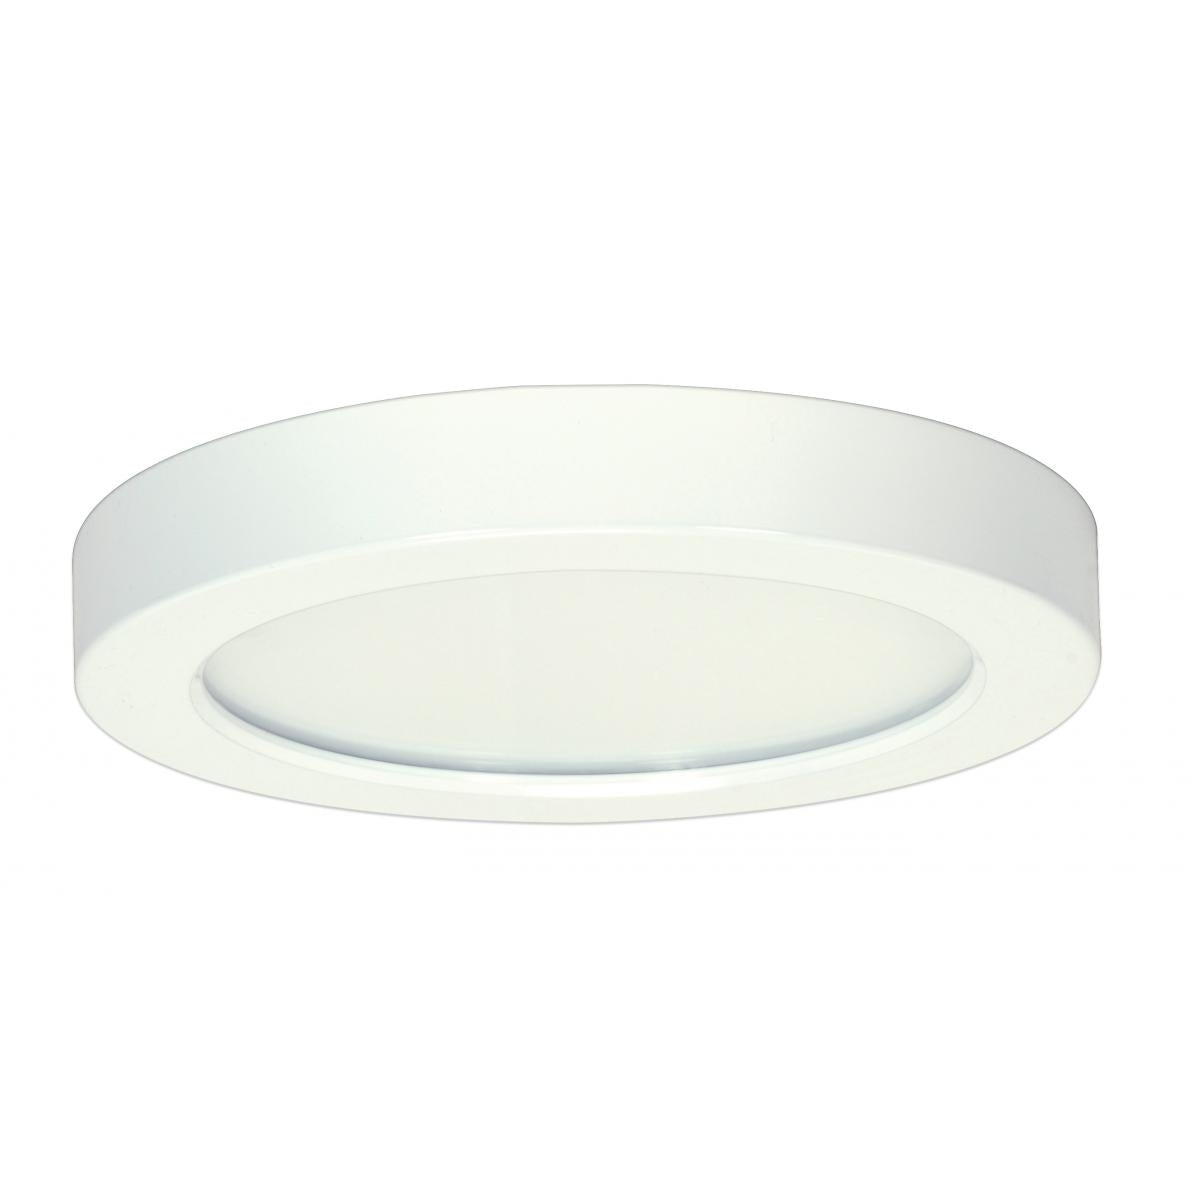 Replacement for Satco S29331 13.5 watt 7" Flush Mount LED Fixture 3000K Round Shape White Finish 120 volts - NOW 62/1710